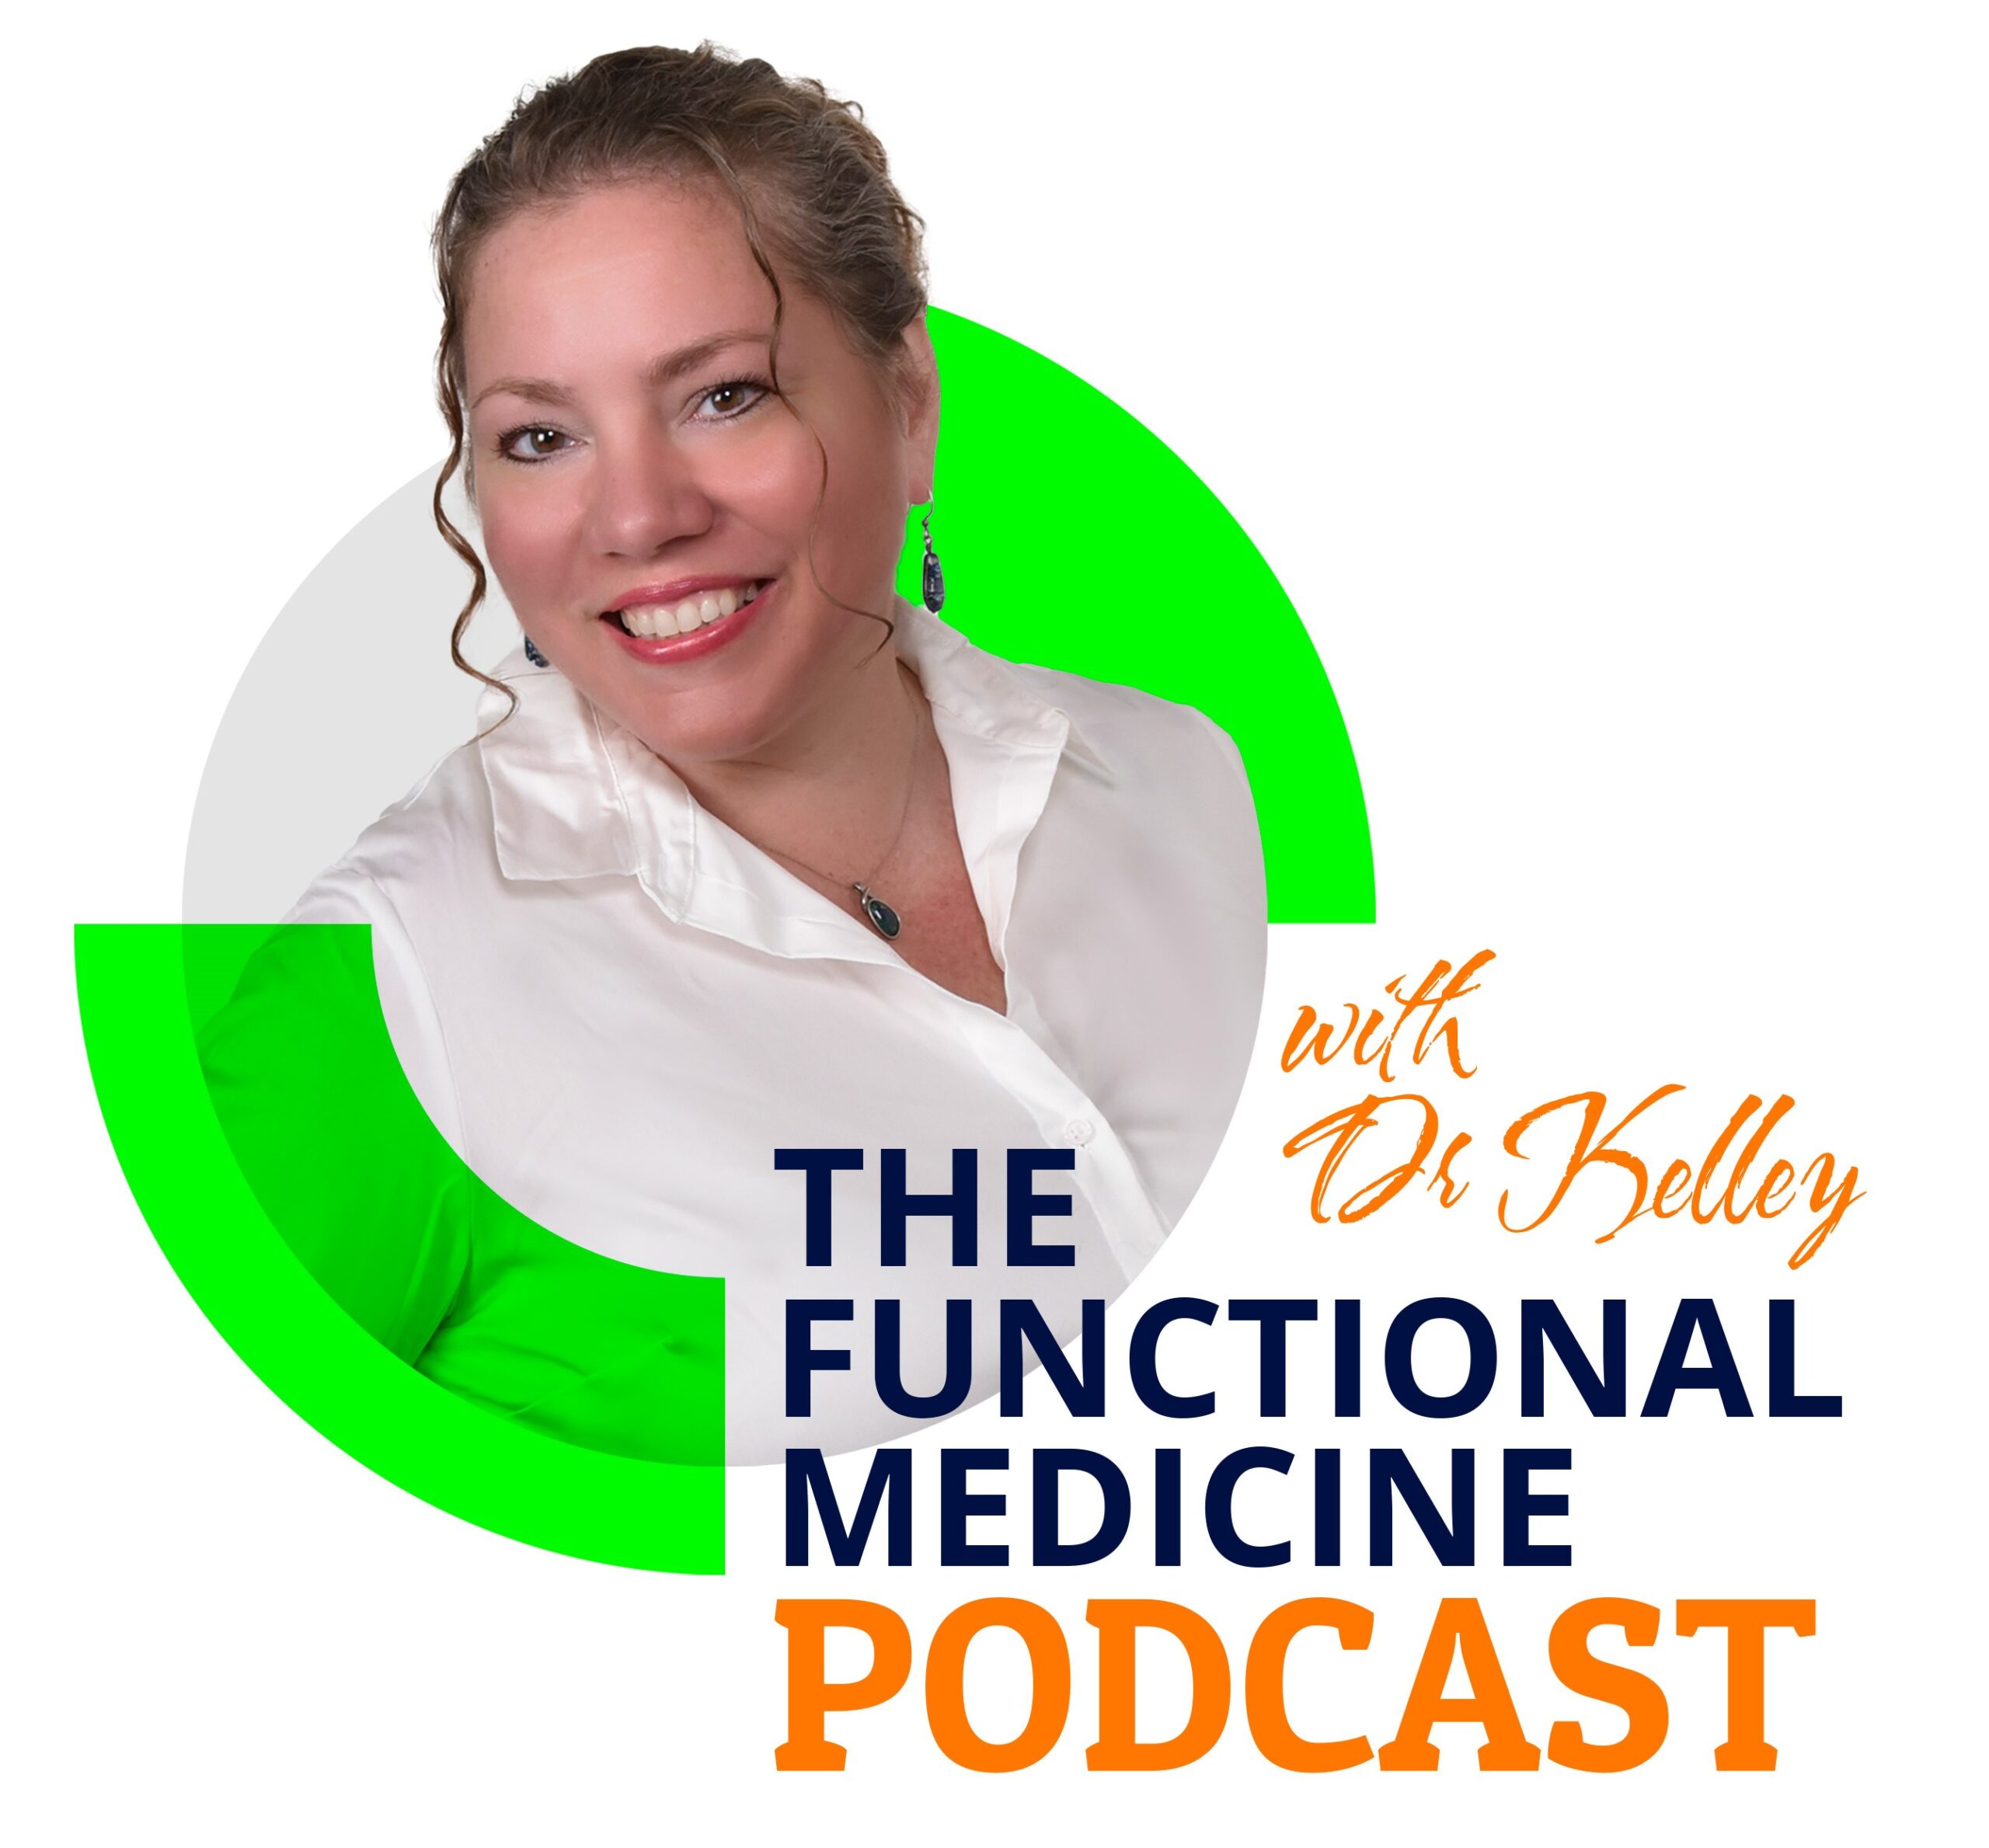 The Functional Medicine Podcast